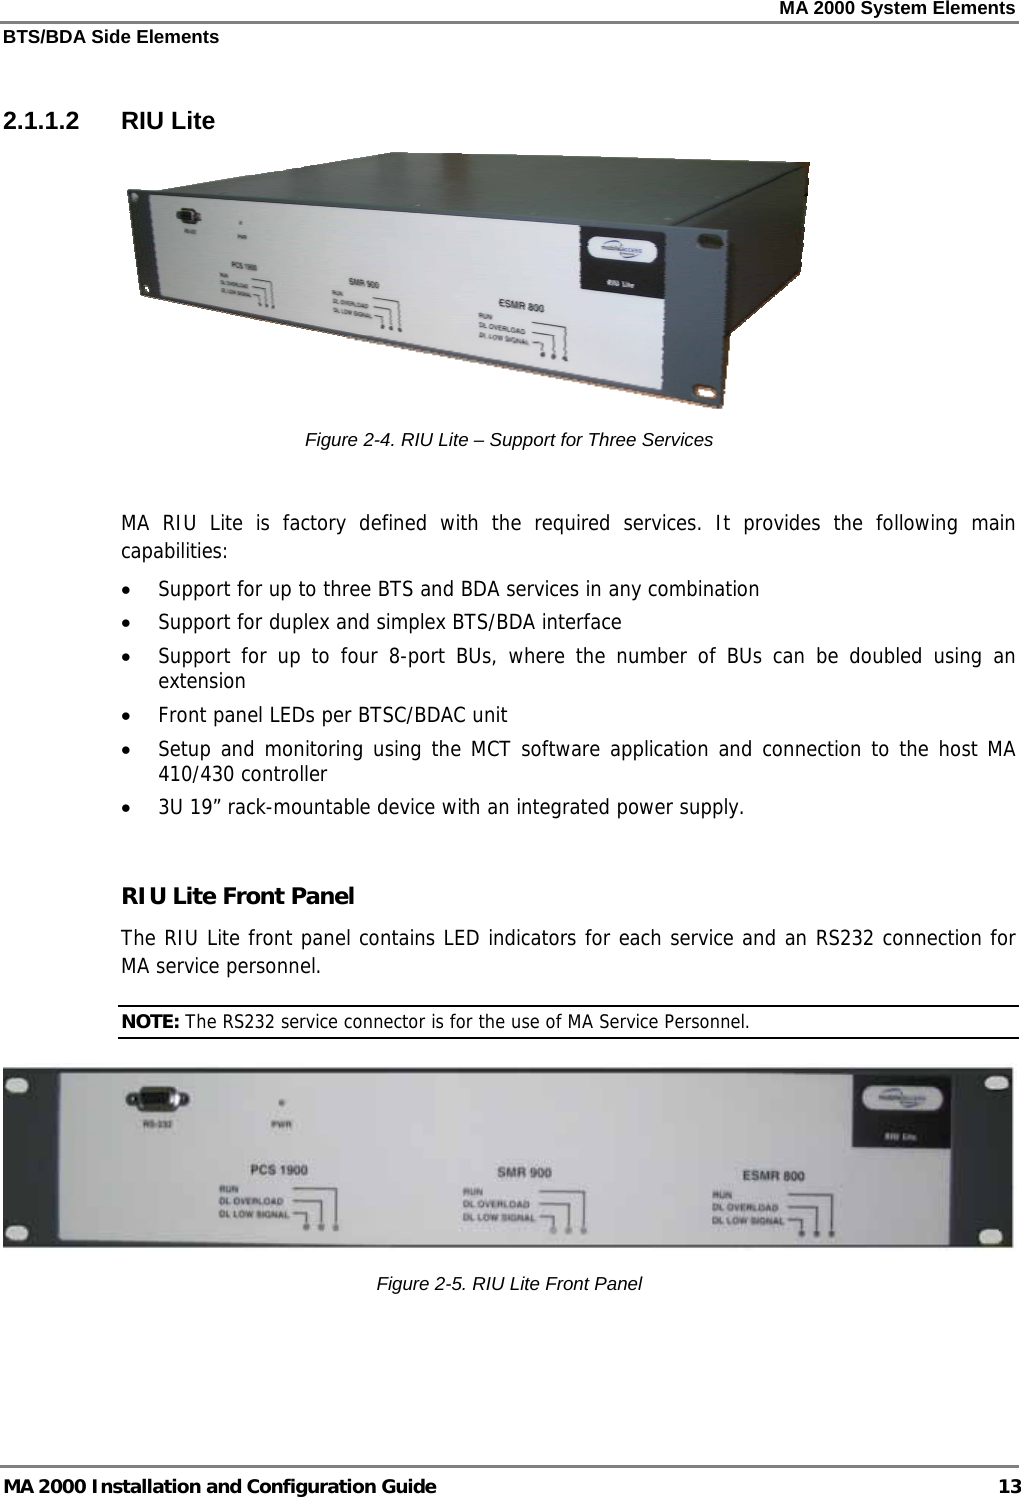 MA 2000 System Elements BTS/BDA Side Elements MA 2000 Installation and Configuration Guide  13  2.1.1.2 RIU Lite  Figure  2-4. RIU Lite – Support for Three Services  MA RIU Lite is factory defined with the required services. It provides the following main capabilities: • Support for up to three BTS and BDA services in any combination • Support for duplex and simplex BTS/BDA interface • Support for up to four 8-port BUs, where the number of BUs can be doubled using an extension • Front panel LEDs per BTSC/BDAC unit • Setup and monitoring using the MCT software application and connection to the host MA 410/430 controller • 3U 19” rack-mountable device with an integrated power supply.  RIU Lite Front Panel The RIU Lite front panel contains LED indicators for each service and an RS232 connection for MA service personnel.  NOTE: The RS232 service connector is for the use of MA Service Personnel.  Figure  2-5. RIU Lite Front Panel  